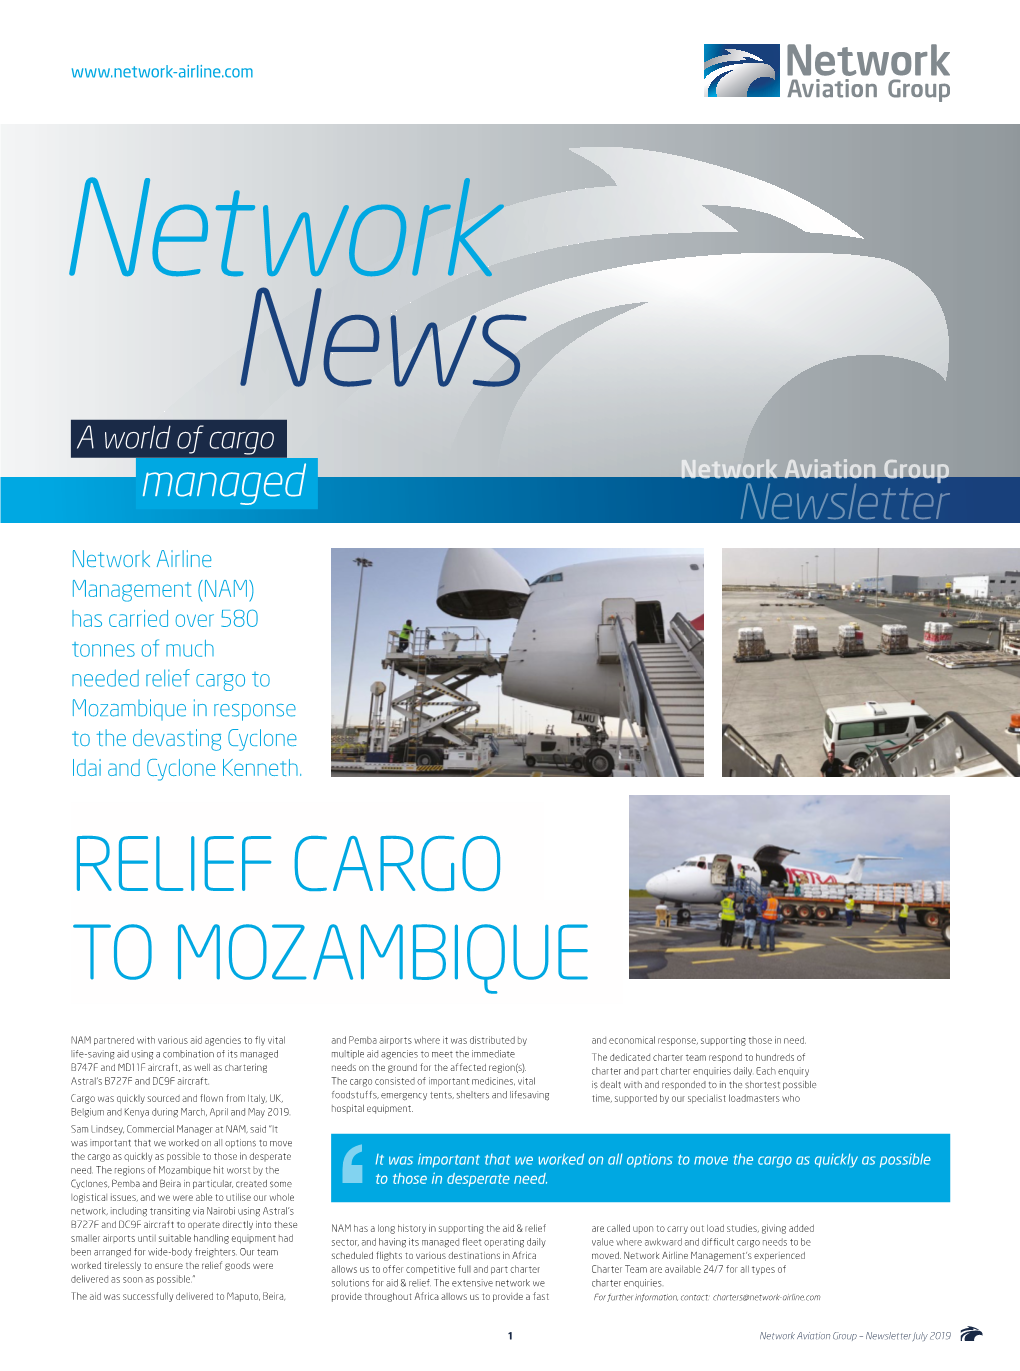 Relief Cargo to Mozambique in Response to the Devasting Cyclone Idai and Cyclone Kenneth